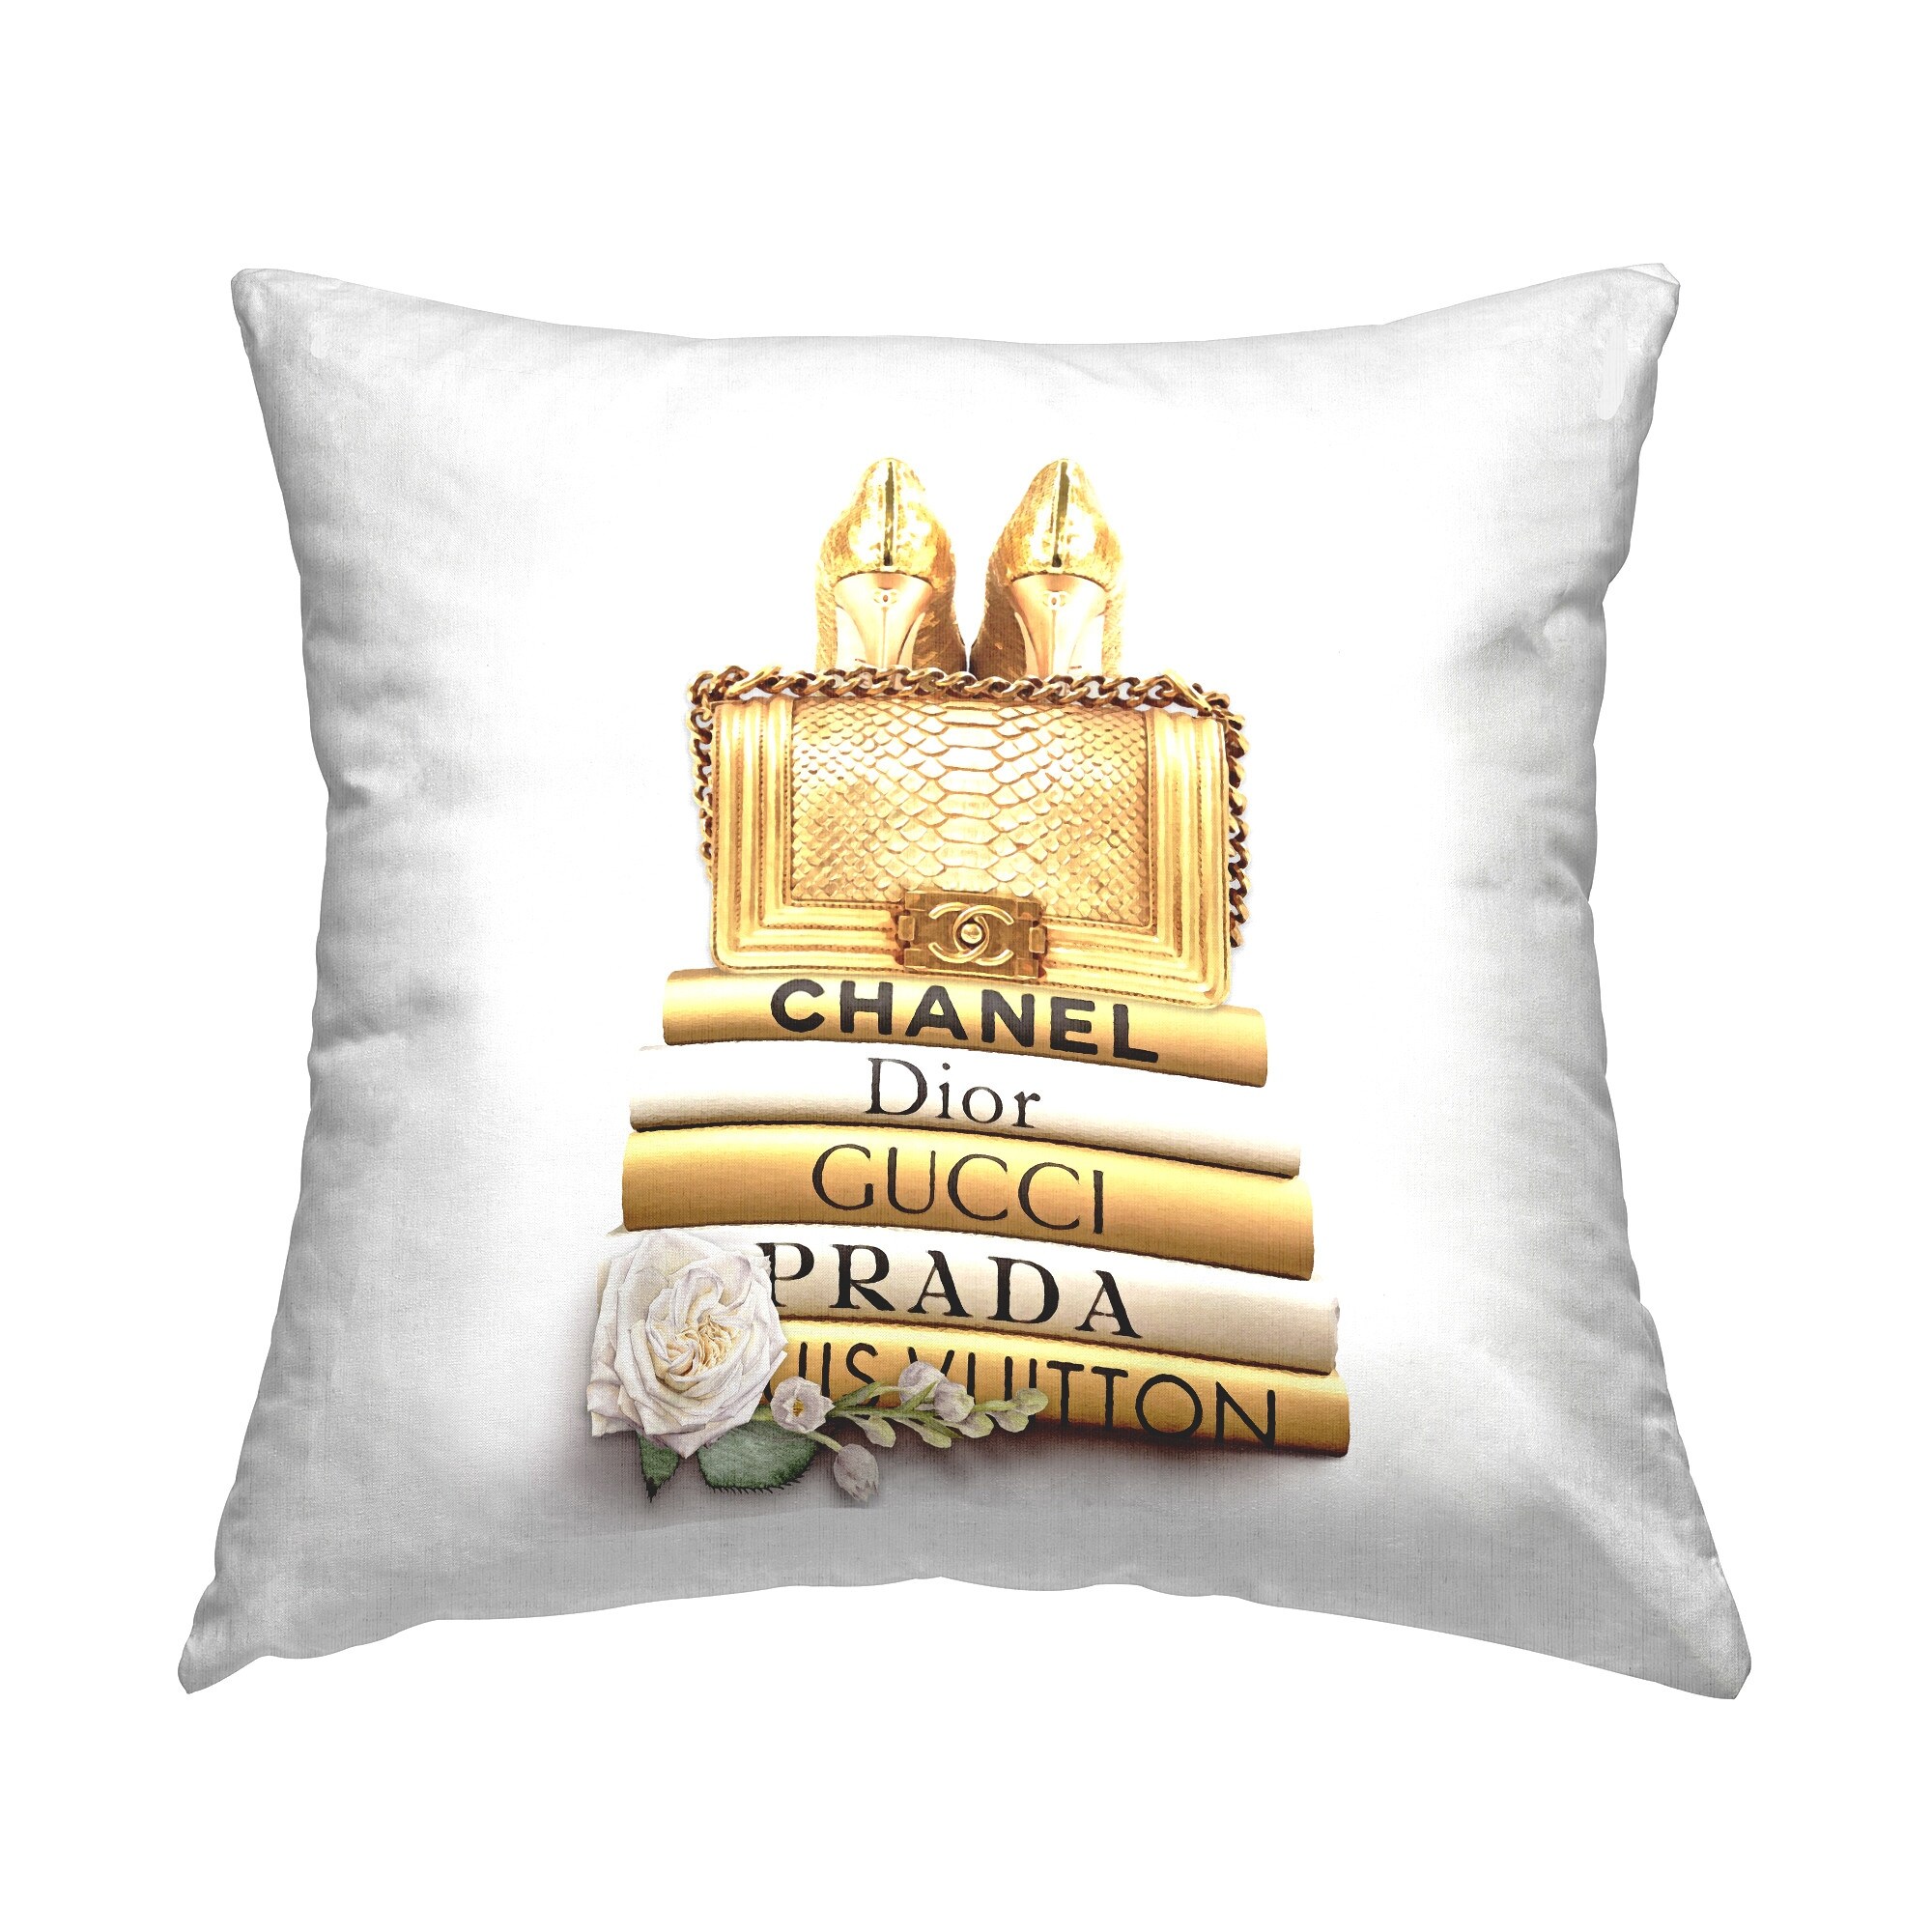 Stupell Industries Elegant Glam Fashion Floral Bag on Bookstack Decorative Printed Throw Pillow by Ros Ruseva